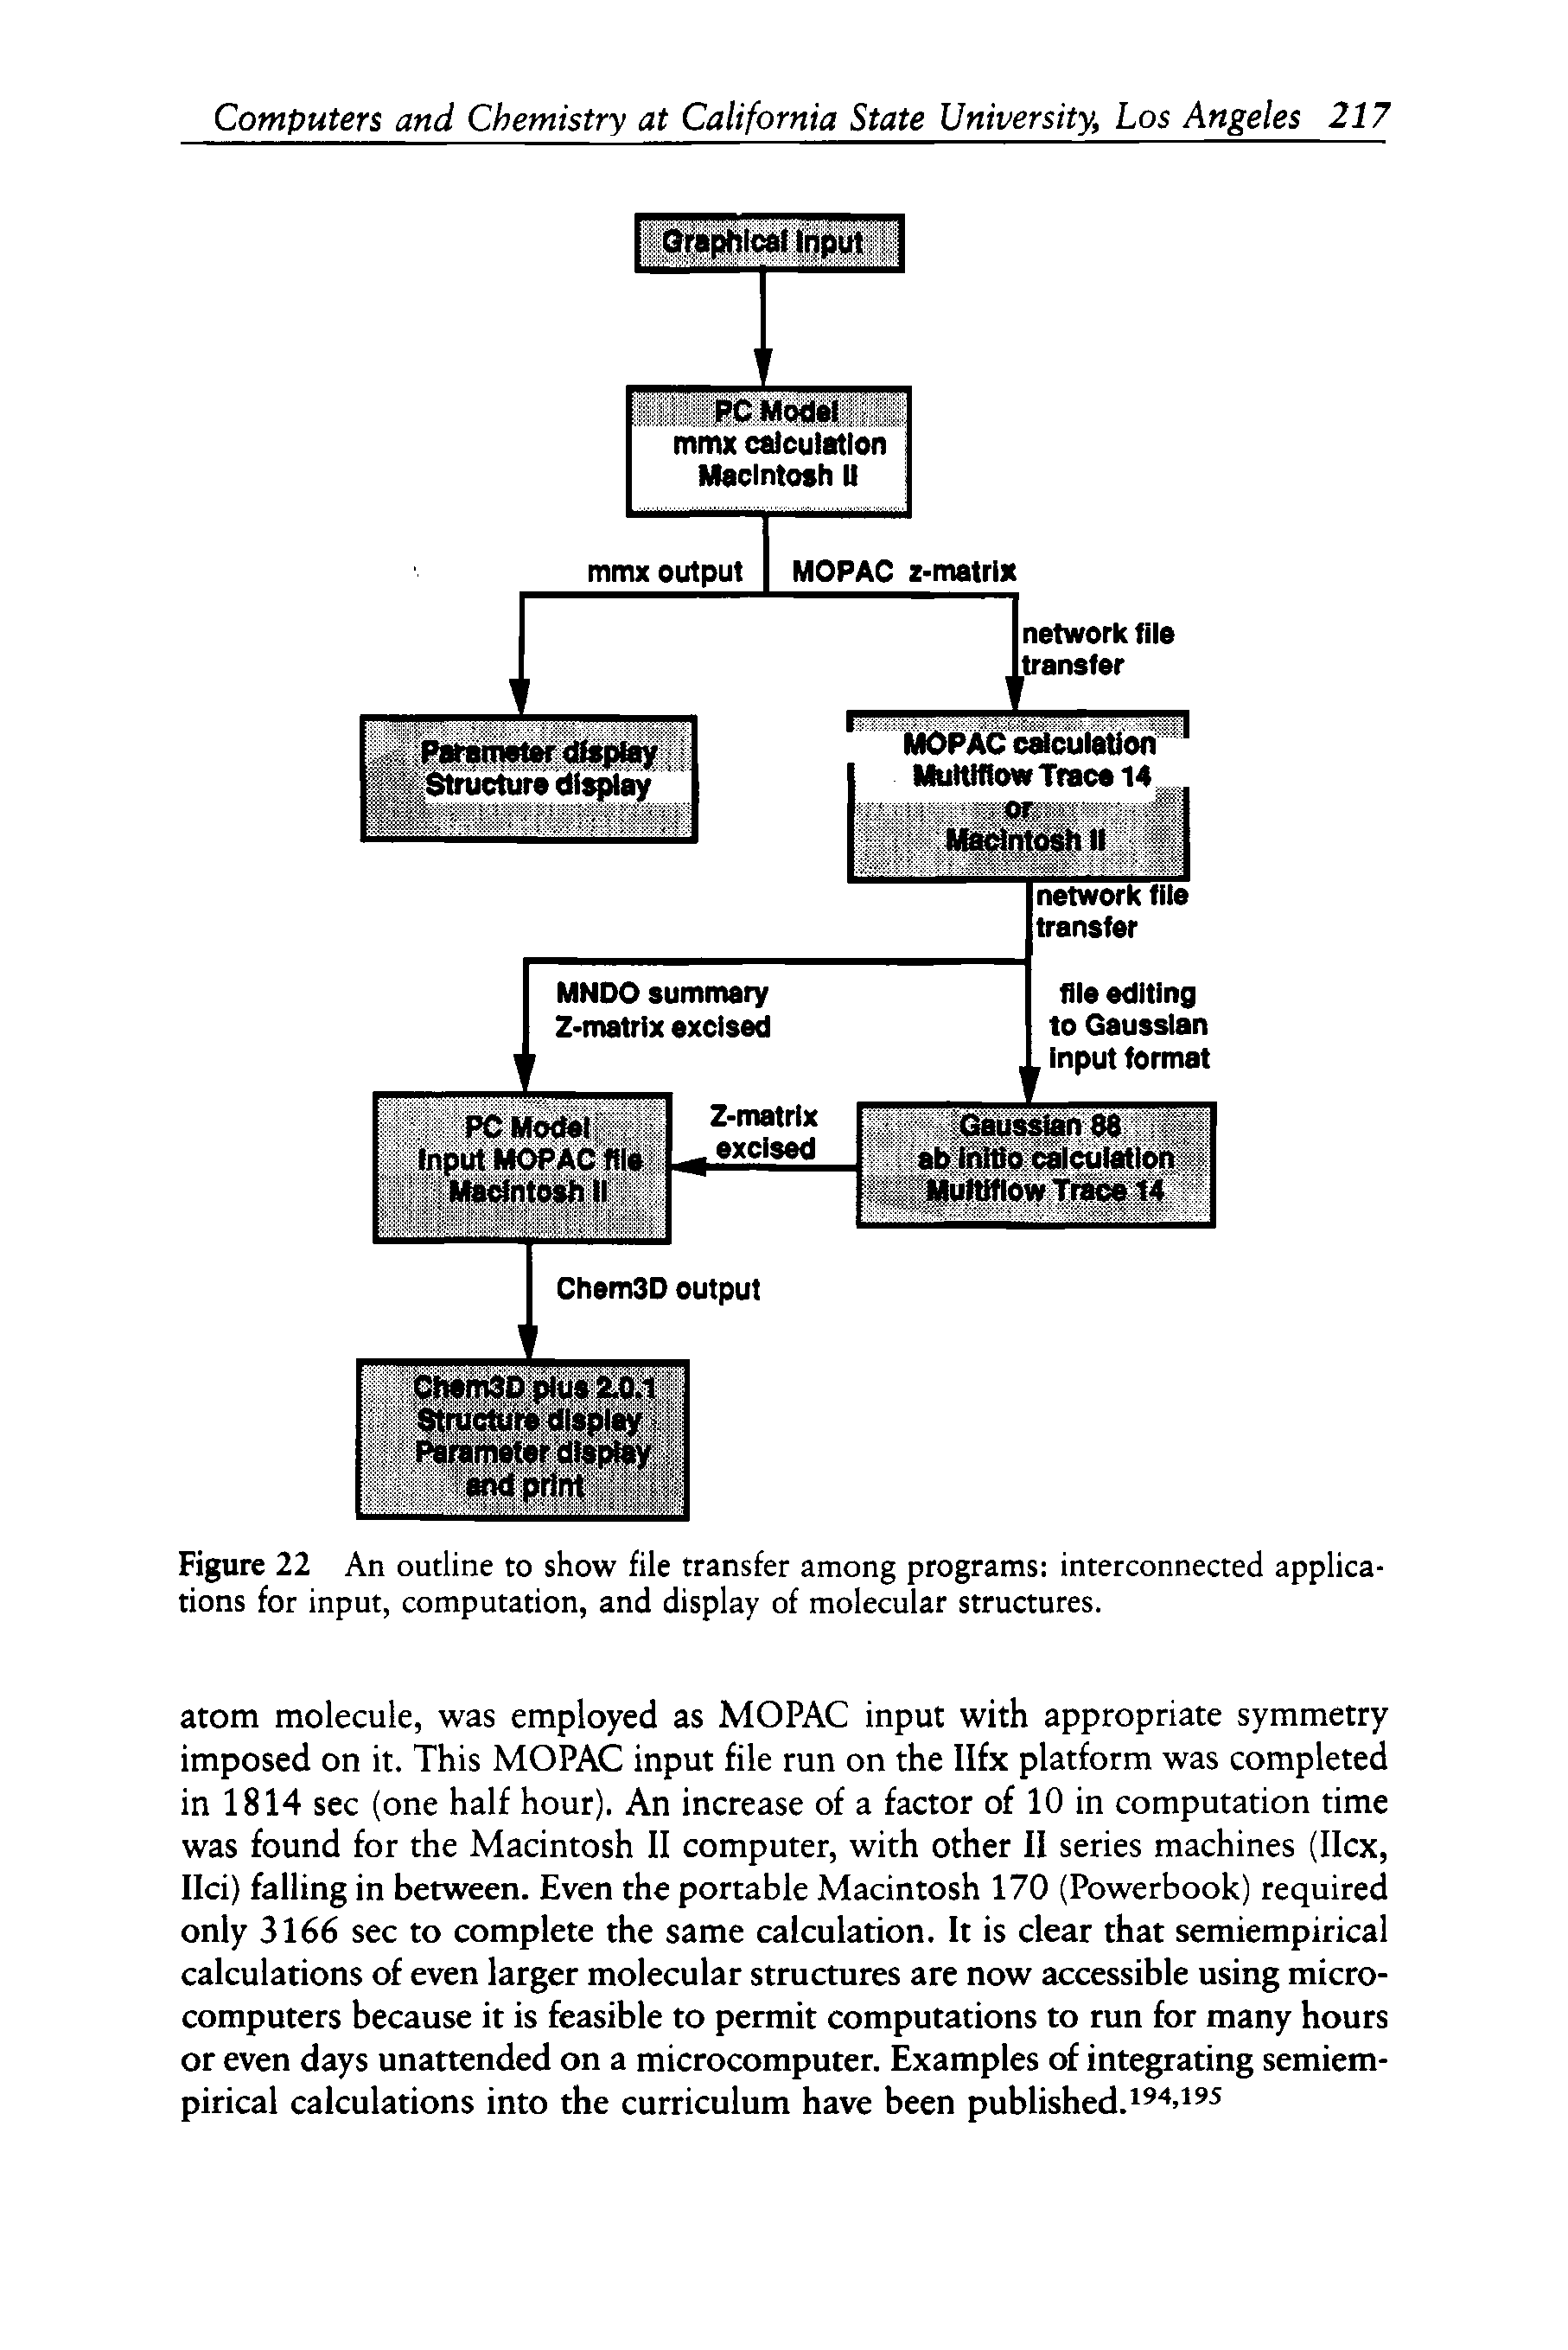 Figure 22 An outline to show file transfer among programs interconnected applications for input, computation, and display of molecular structures.